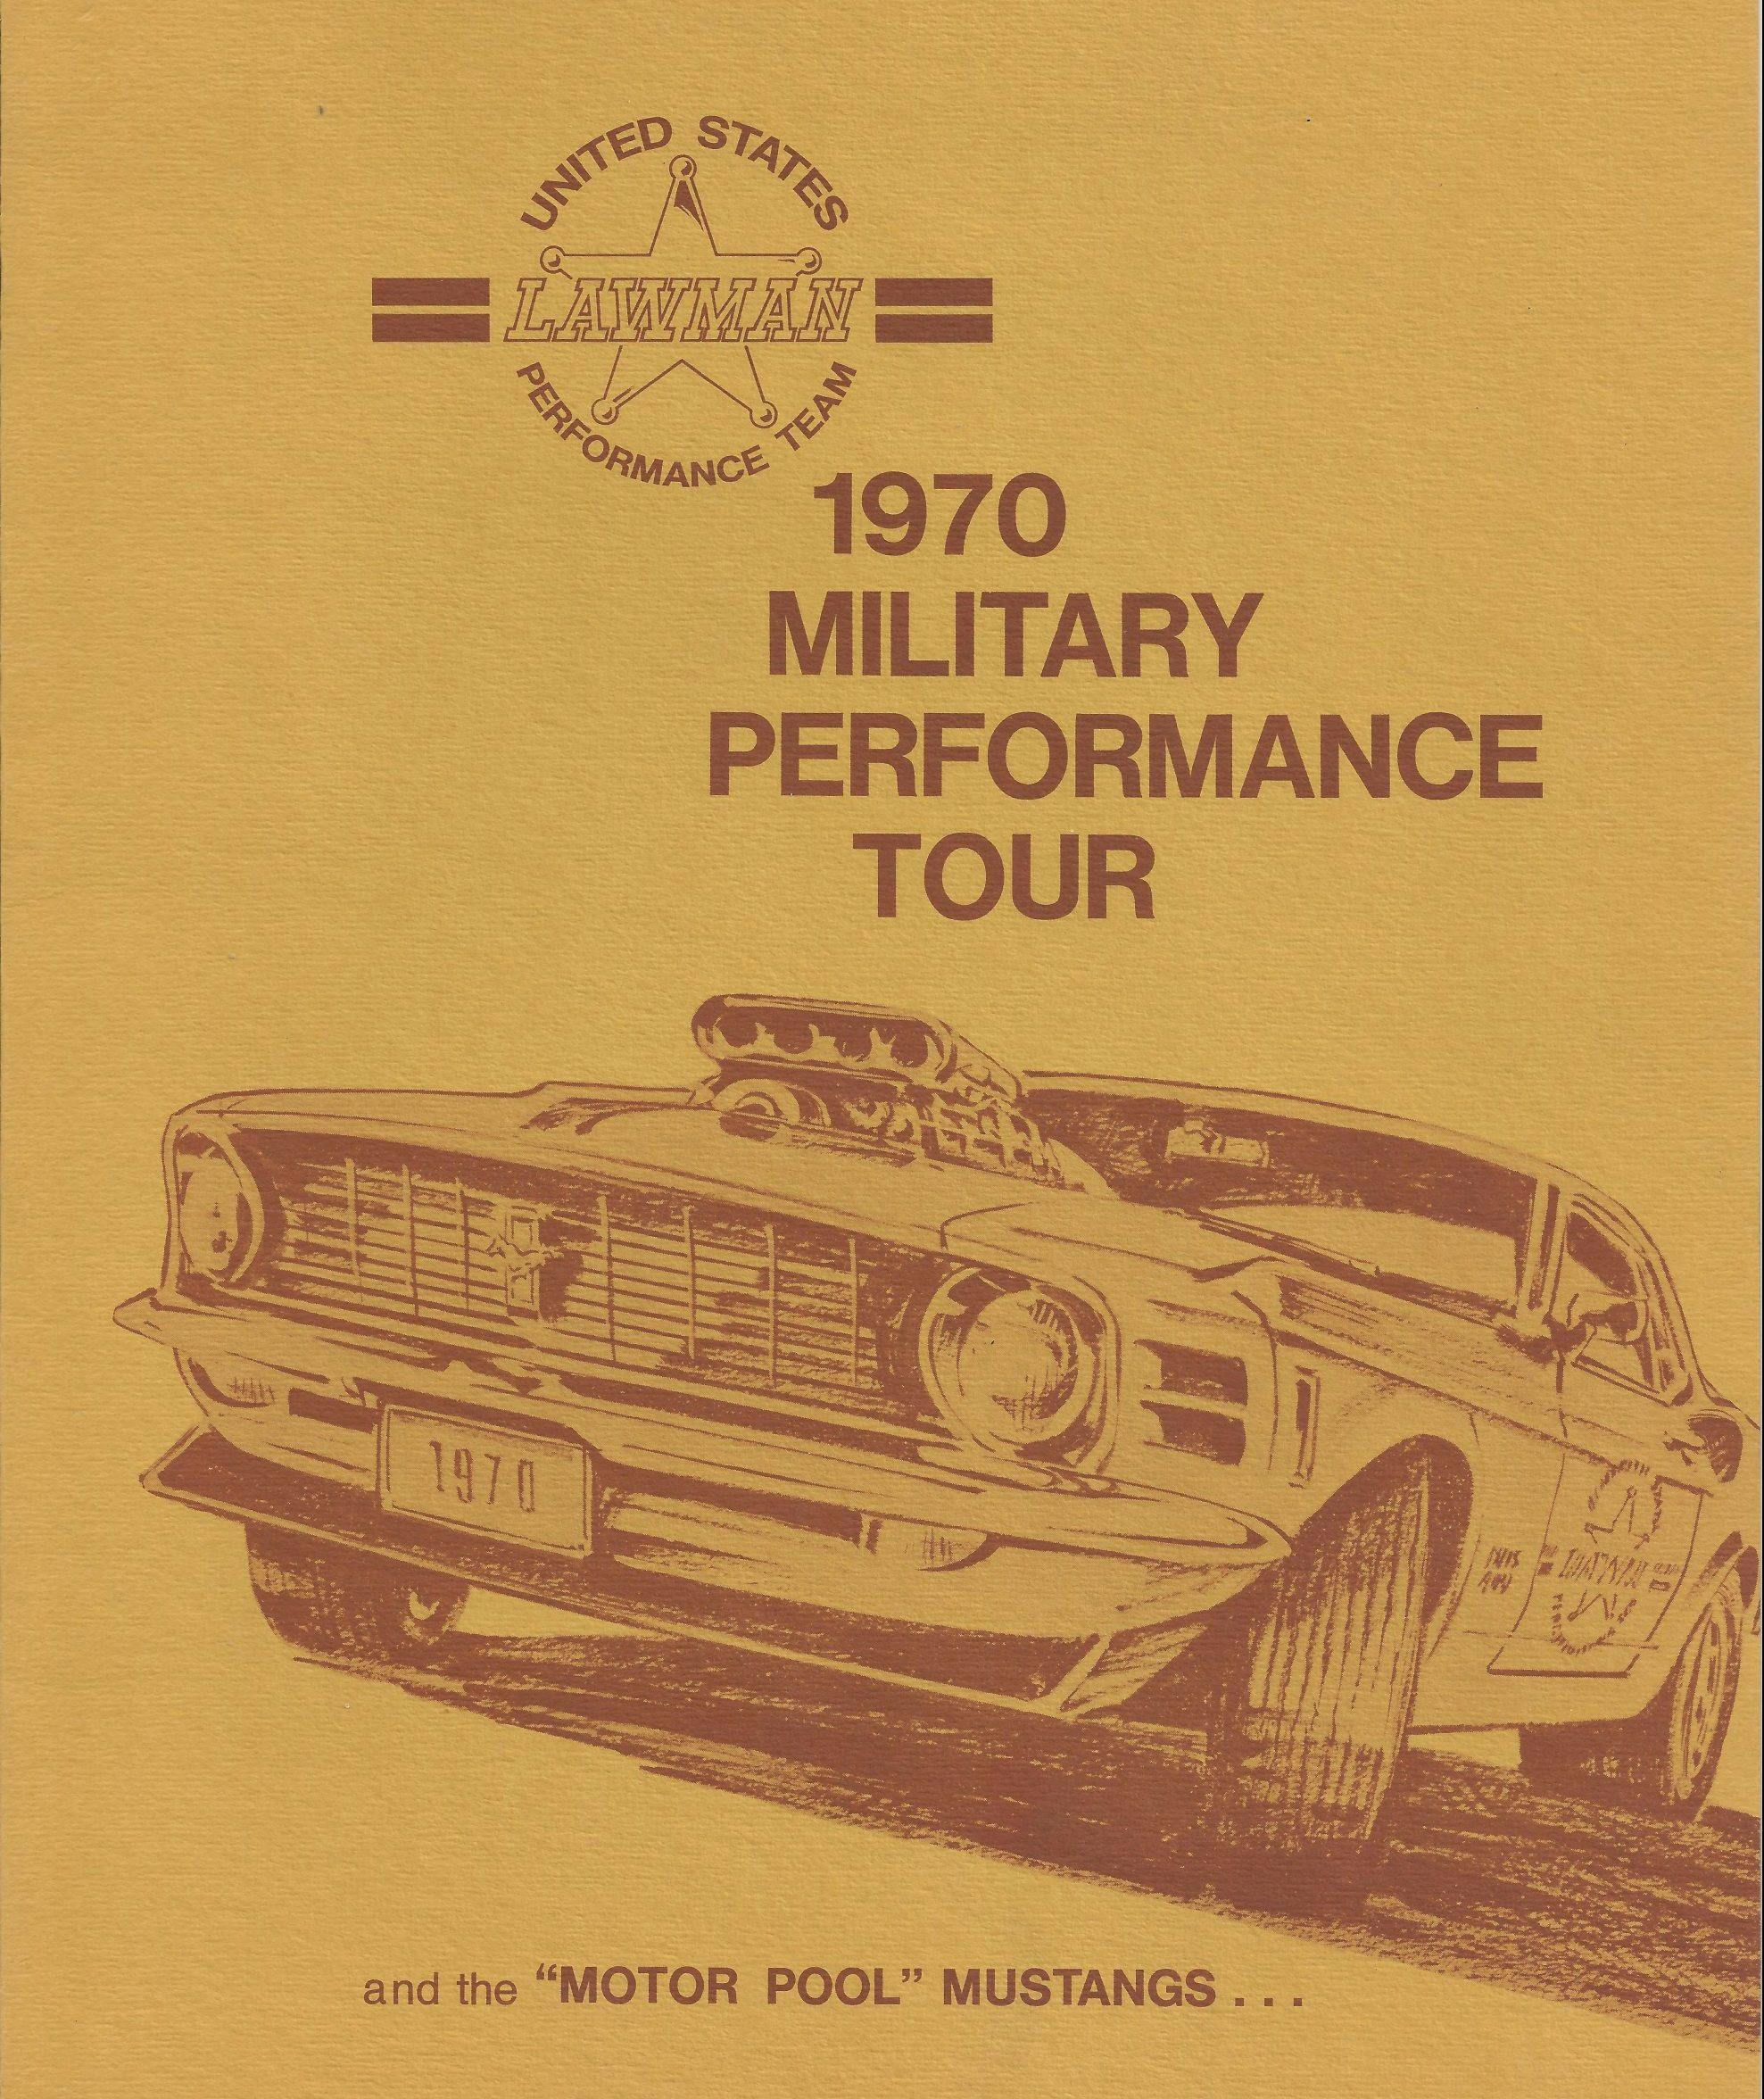 1970 Military Performance Tour literature cover